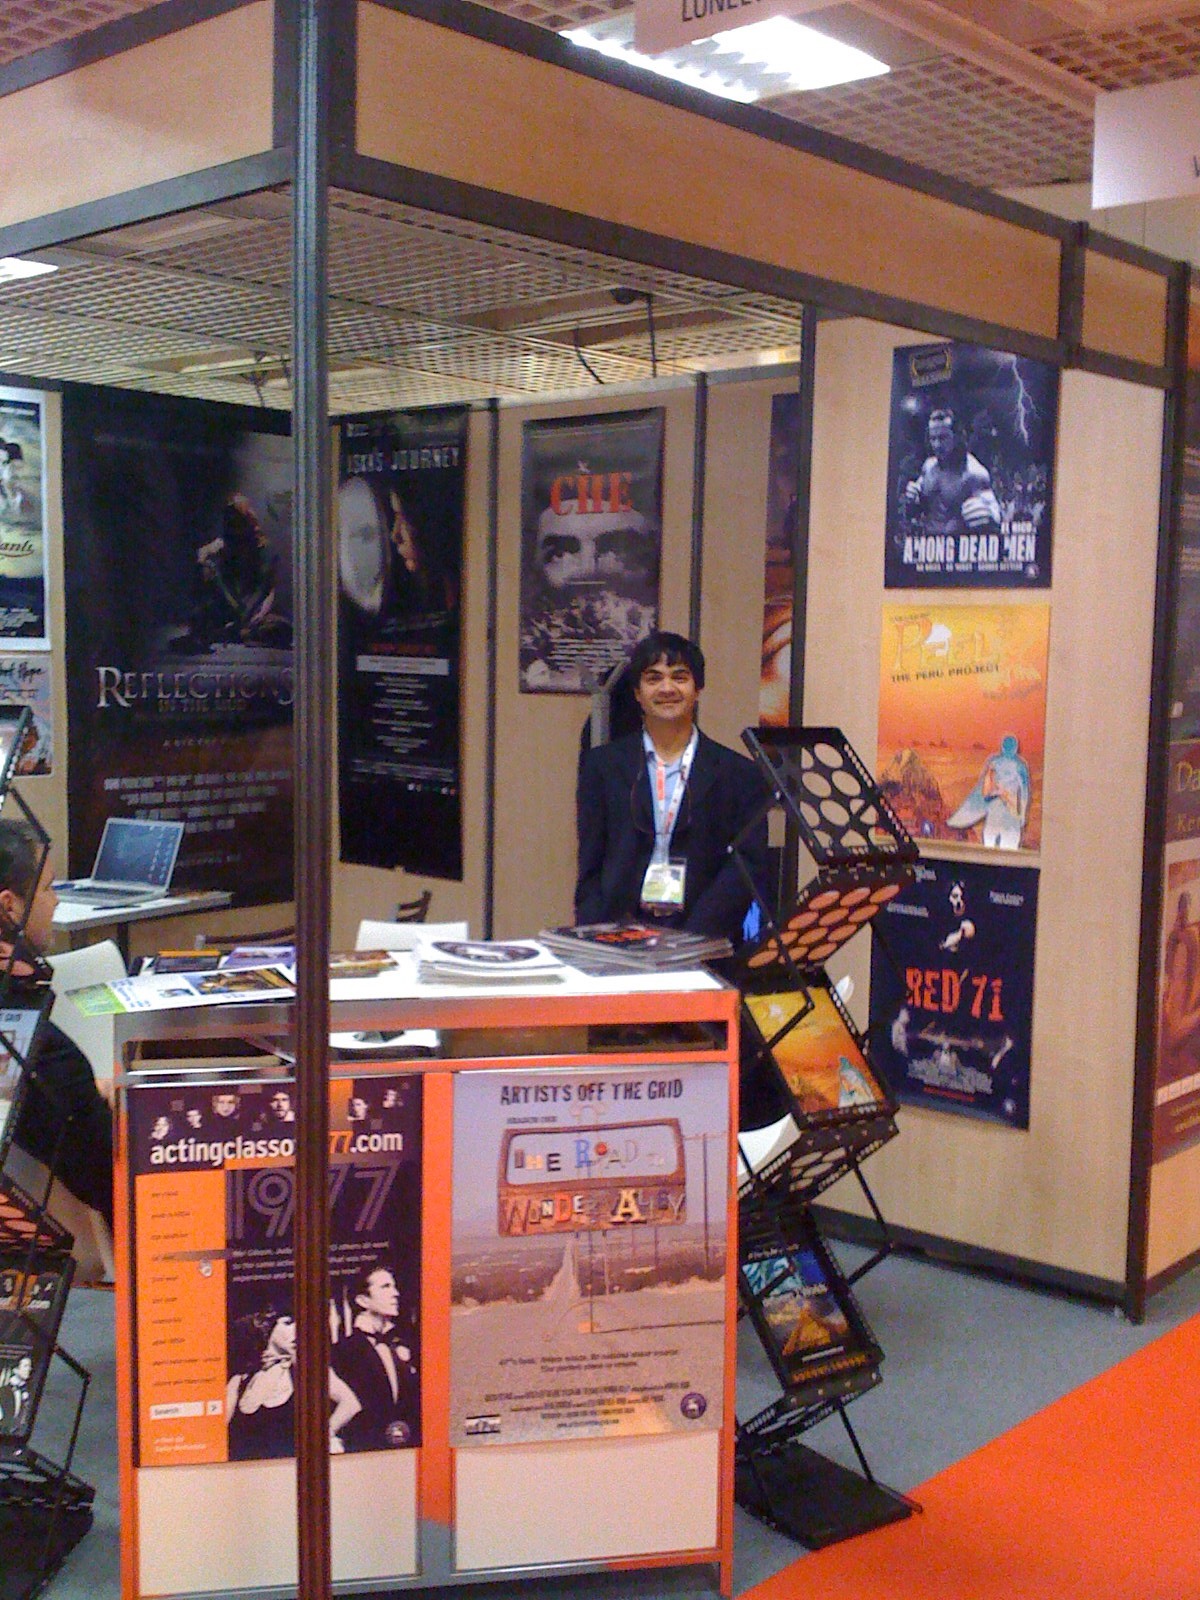 Lonely Seal Releasing booth at the Cannes Film Market, many years ago.